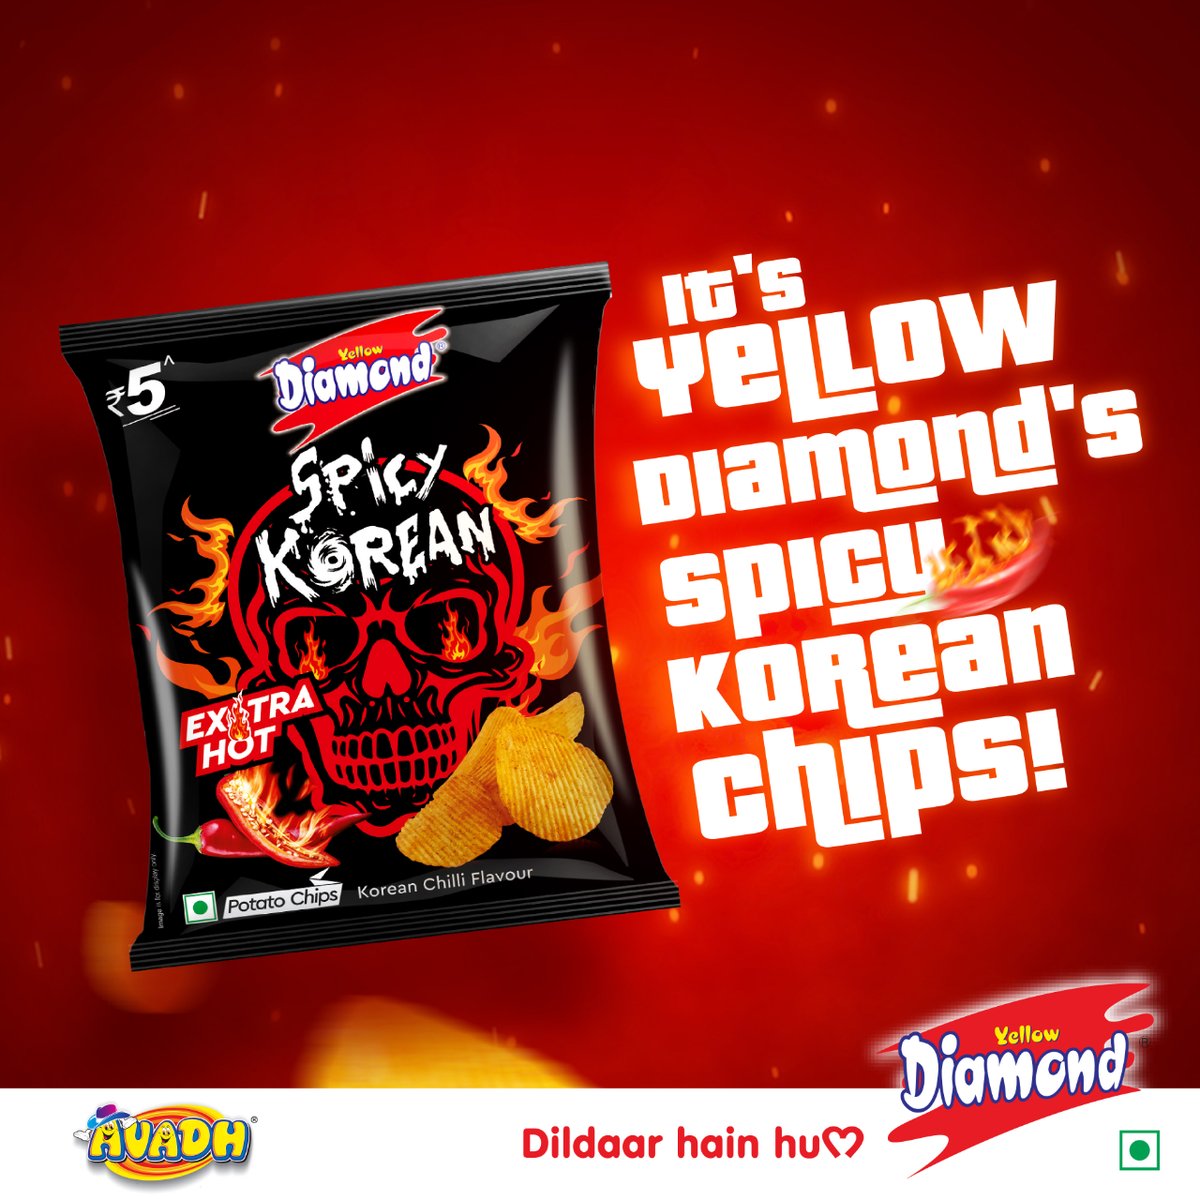 Exciting News from Yellow Diamond! Introducing Our New Spicy Korean Chilli Potato Chips. Get ready to experience the bold flavours of Korea in every crunch!

#YellowDiamond #DilDaarHaiHum #RichFeast #Avadh #Chulbule #Chips #ChipsVariety #SnackTime #FunTime